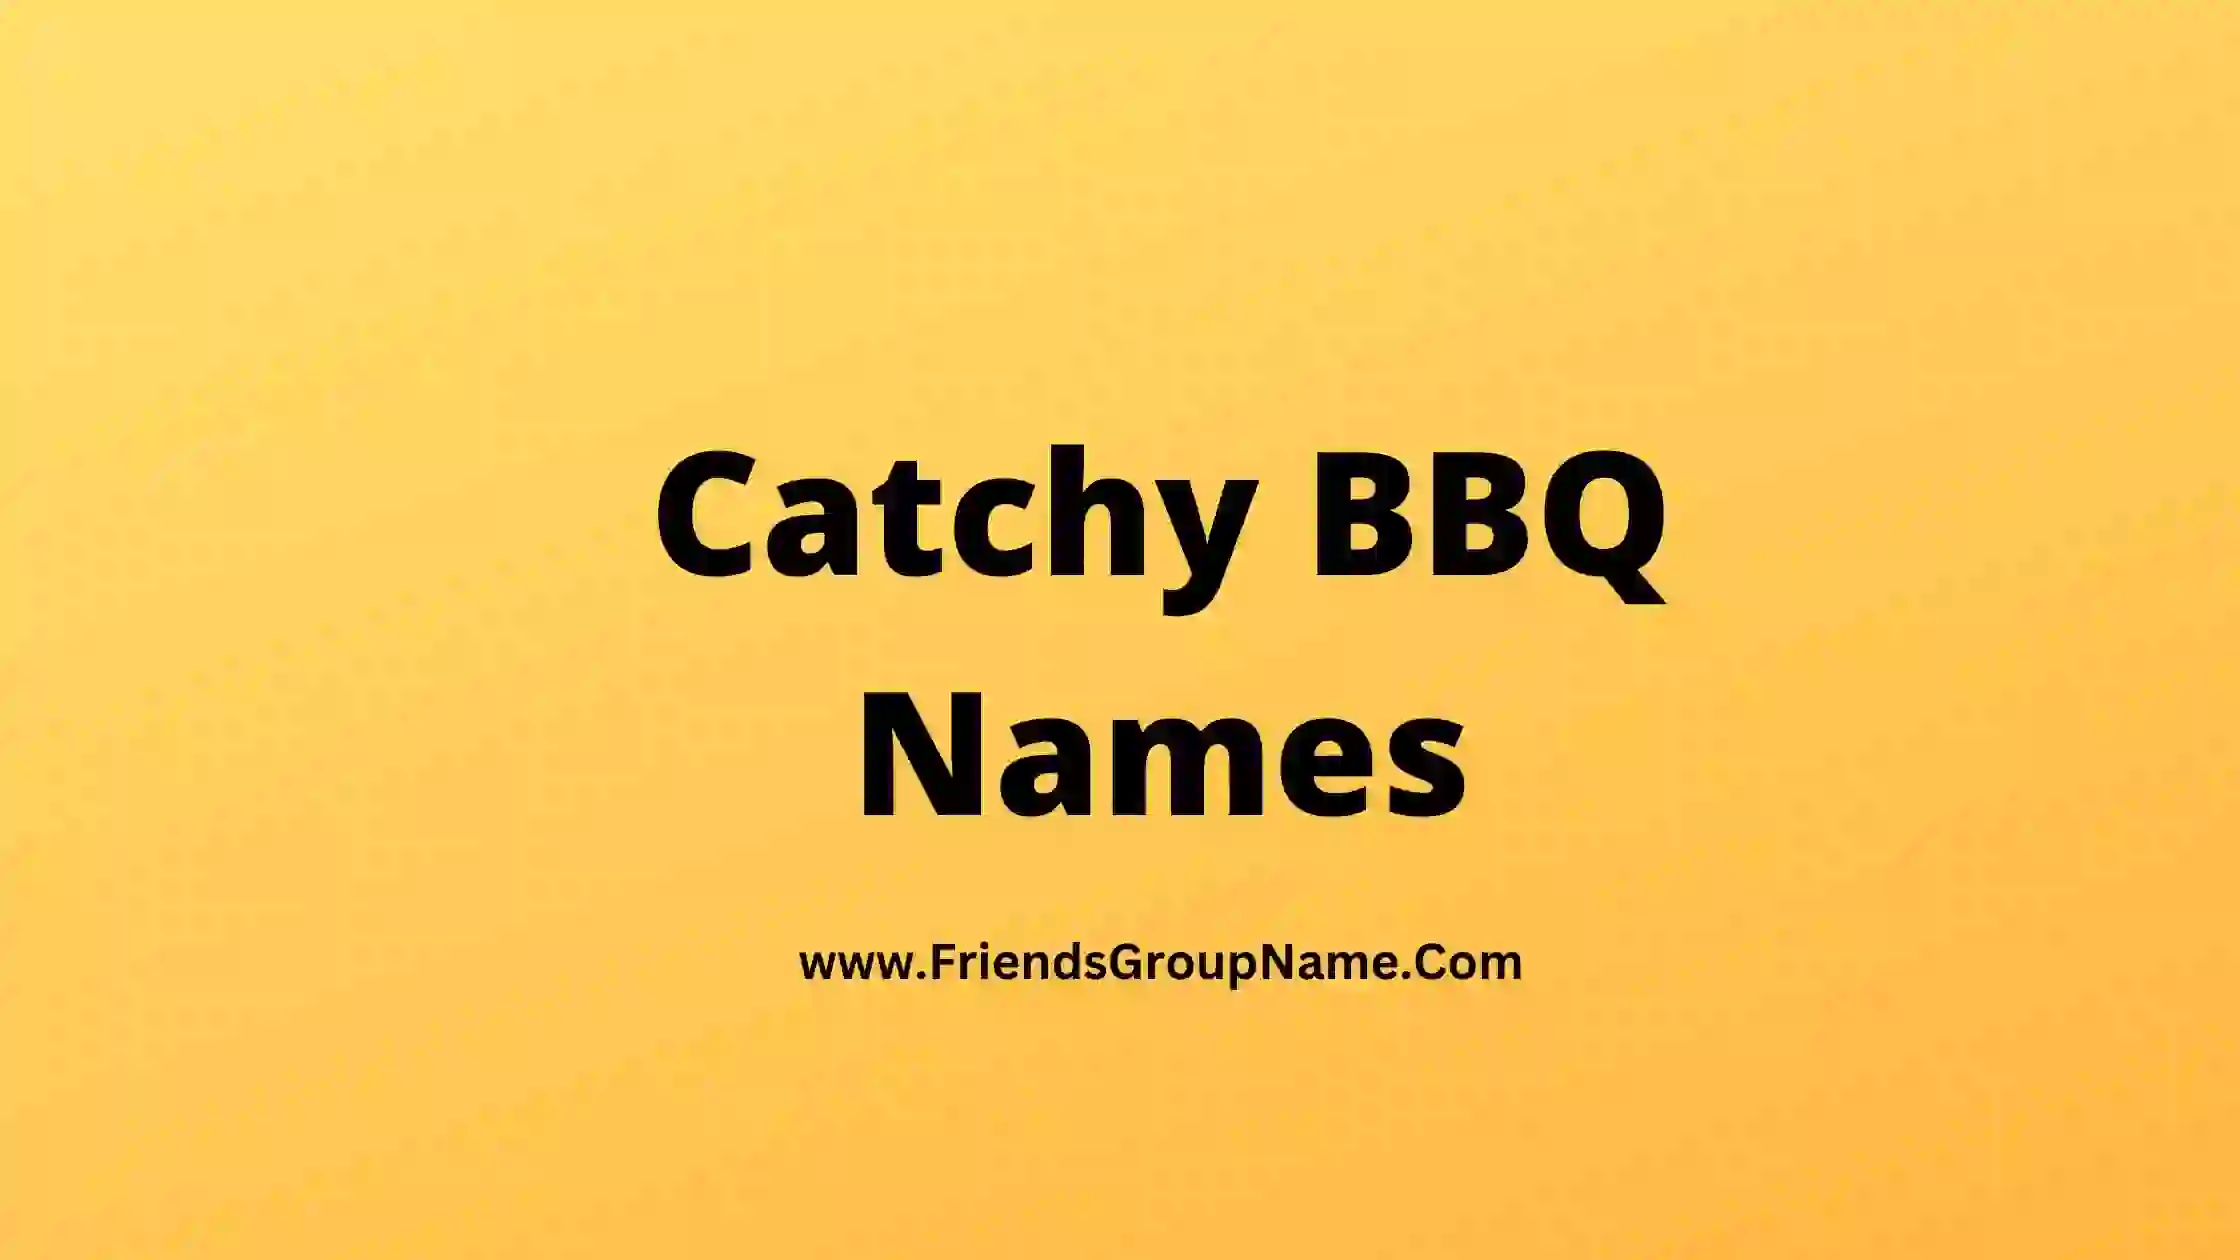 Catchy BBQ Names